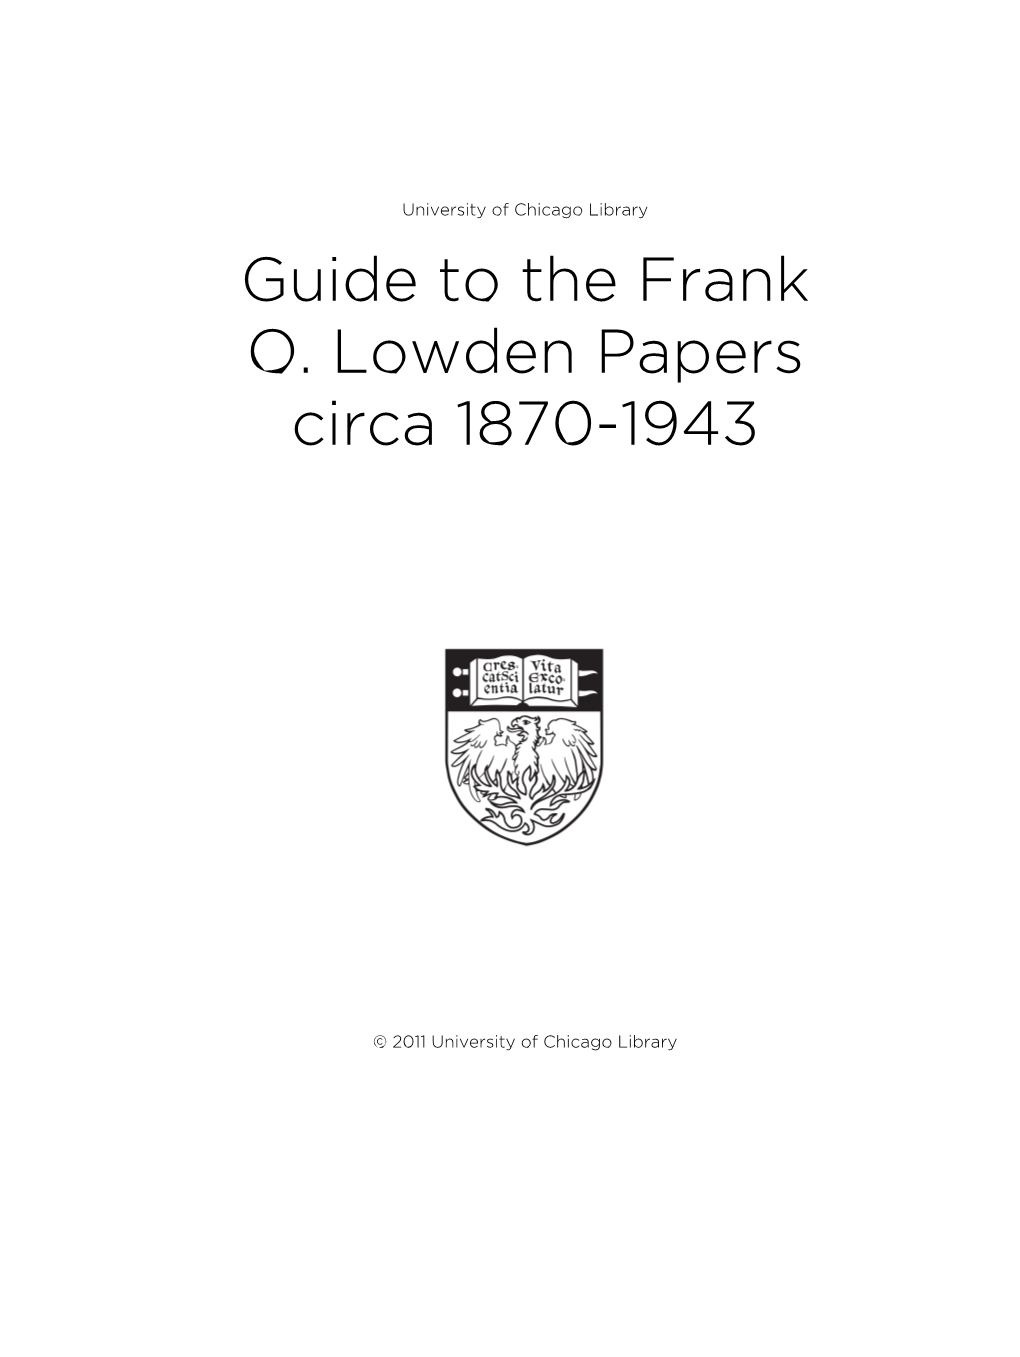 Guide to the Frank O. Lowden Papers Circa 1870-1943